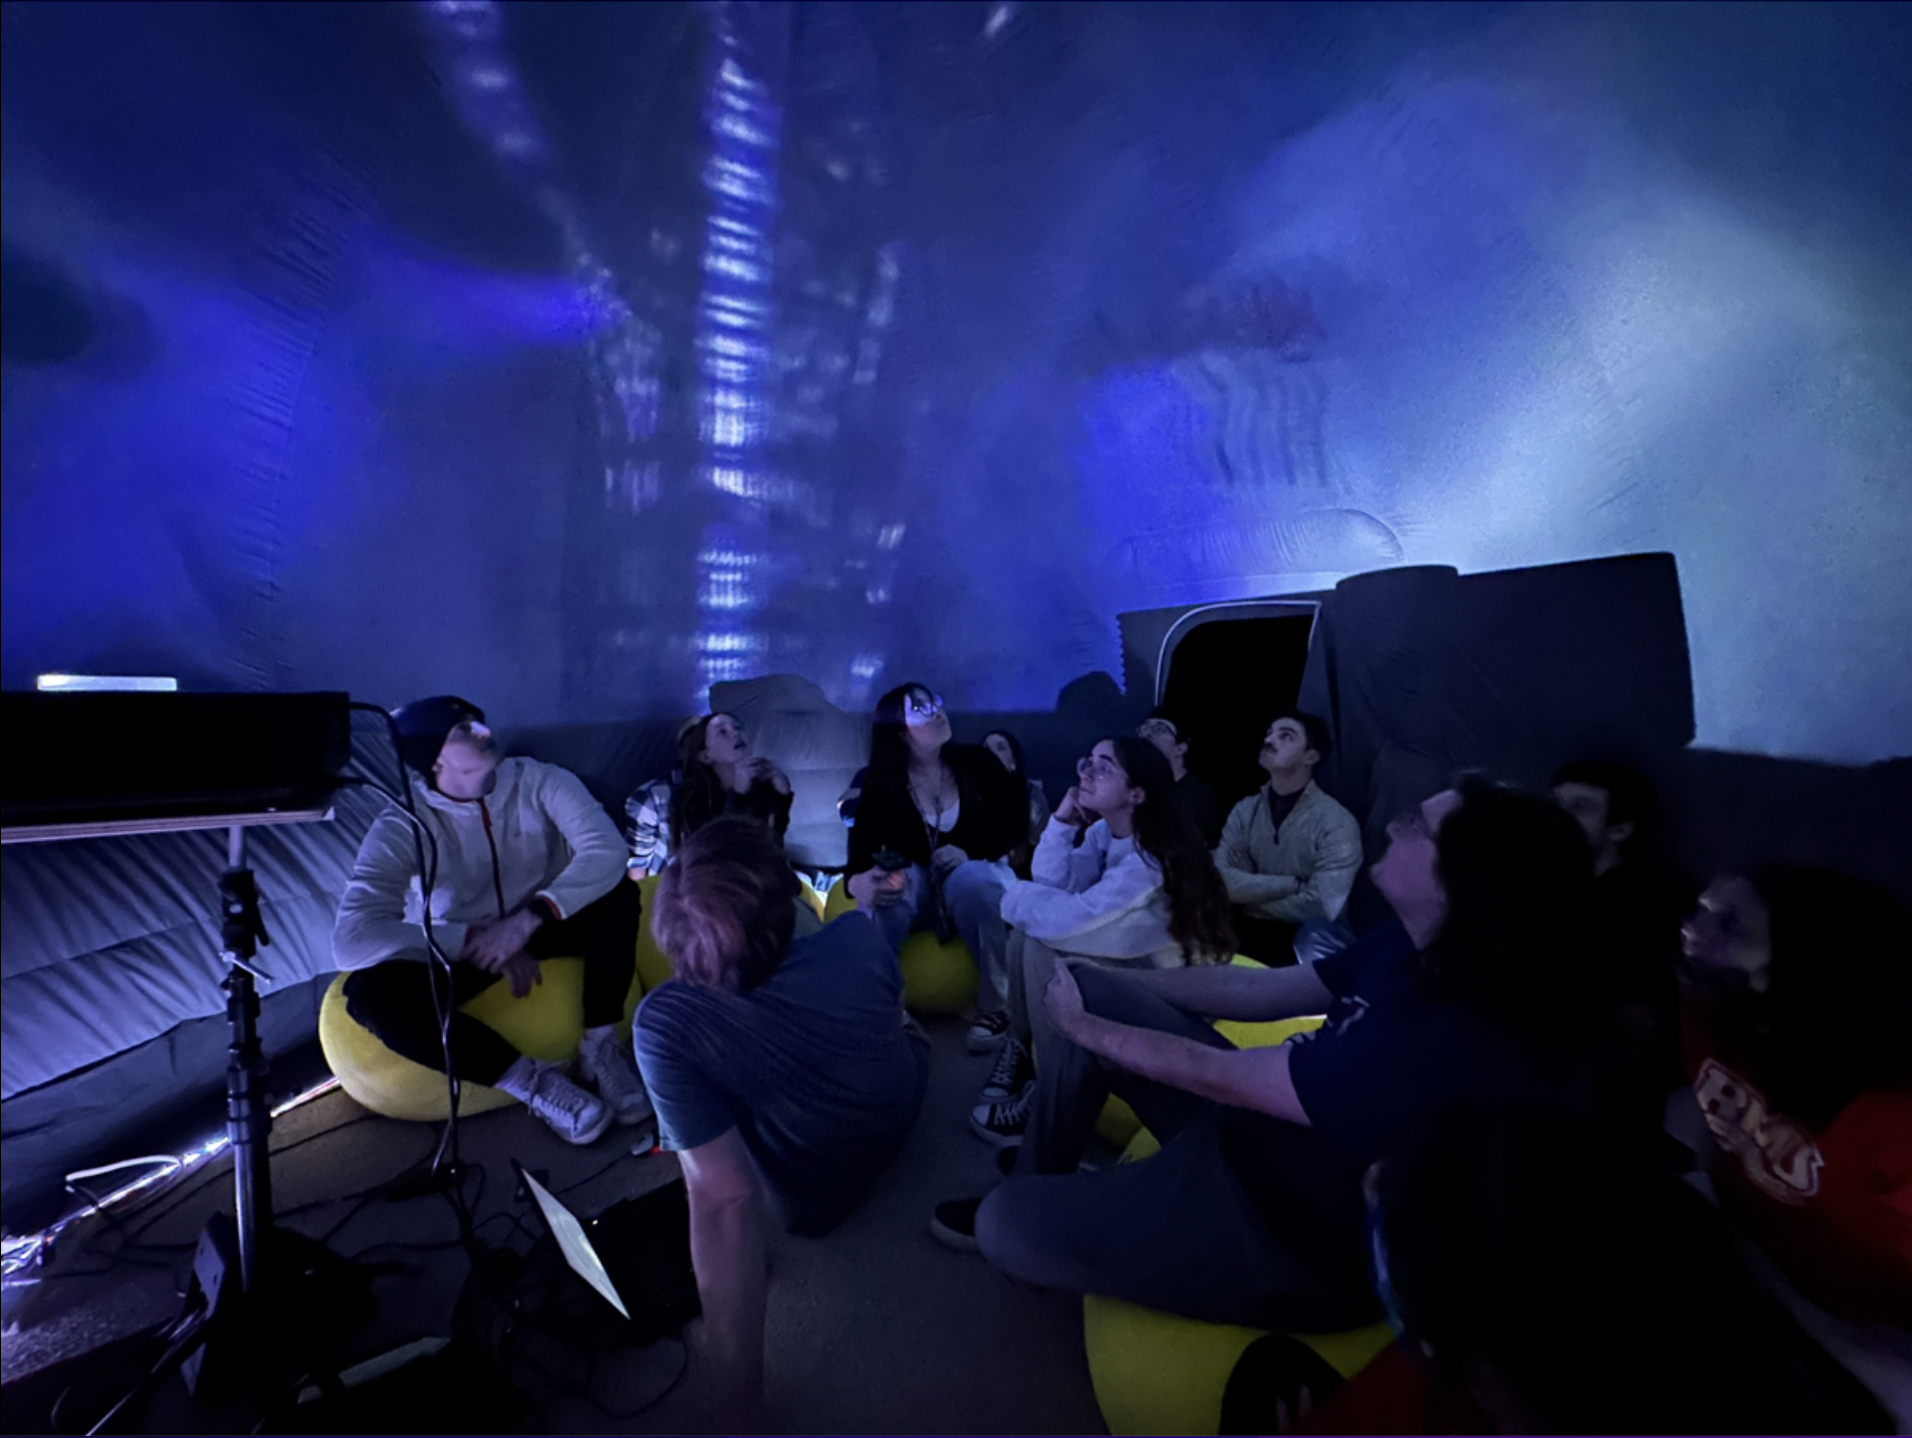 inside immersive experience dome